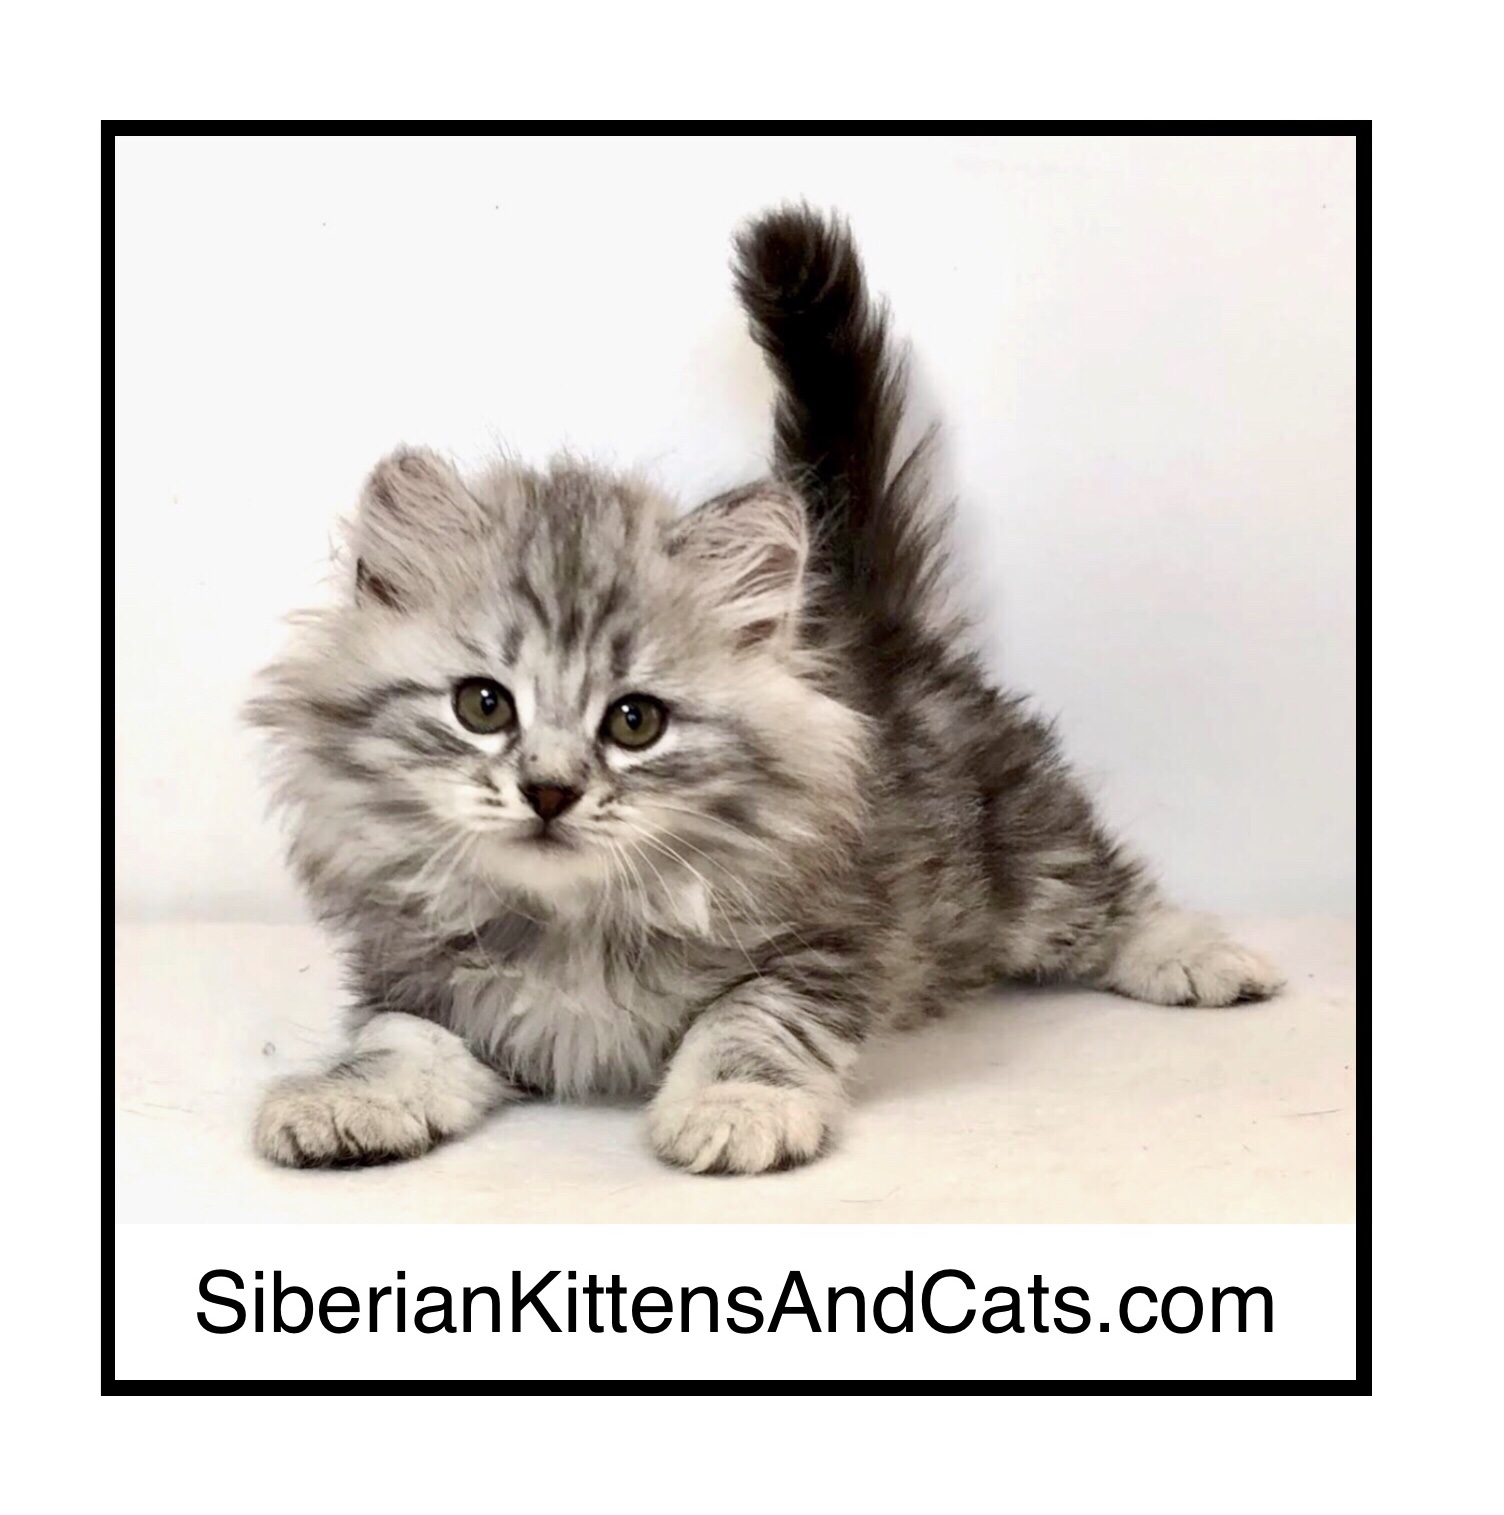 Siberian Kittens And Cats